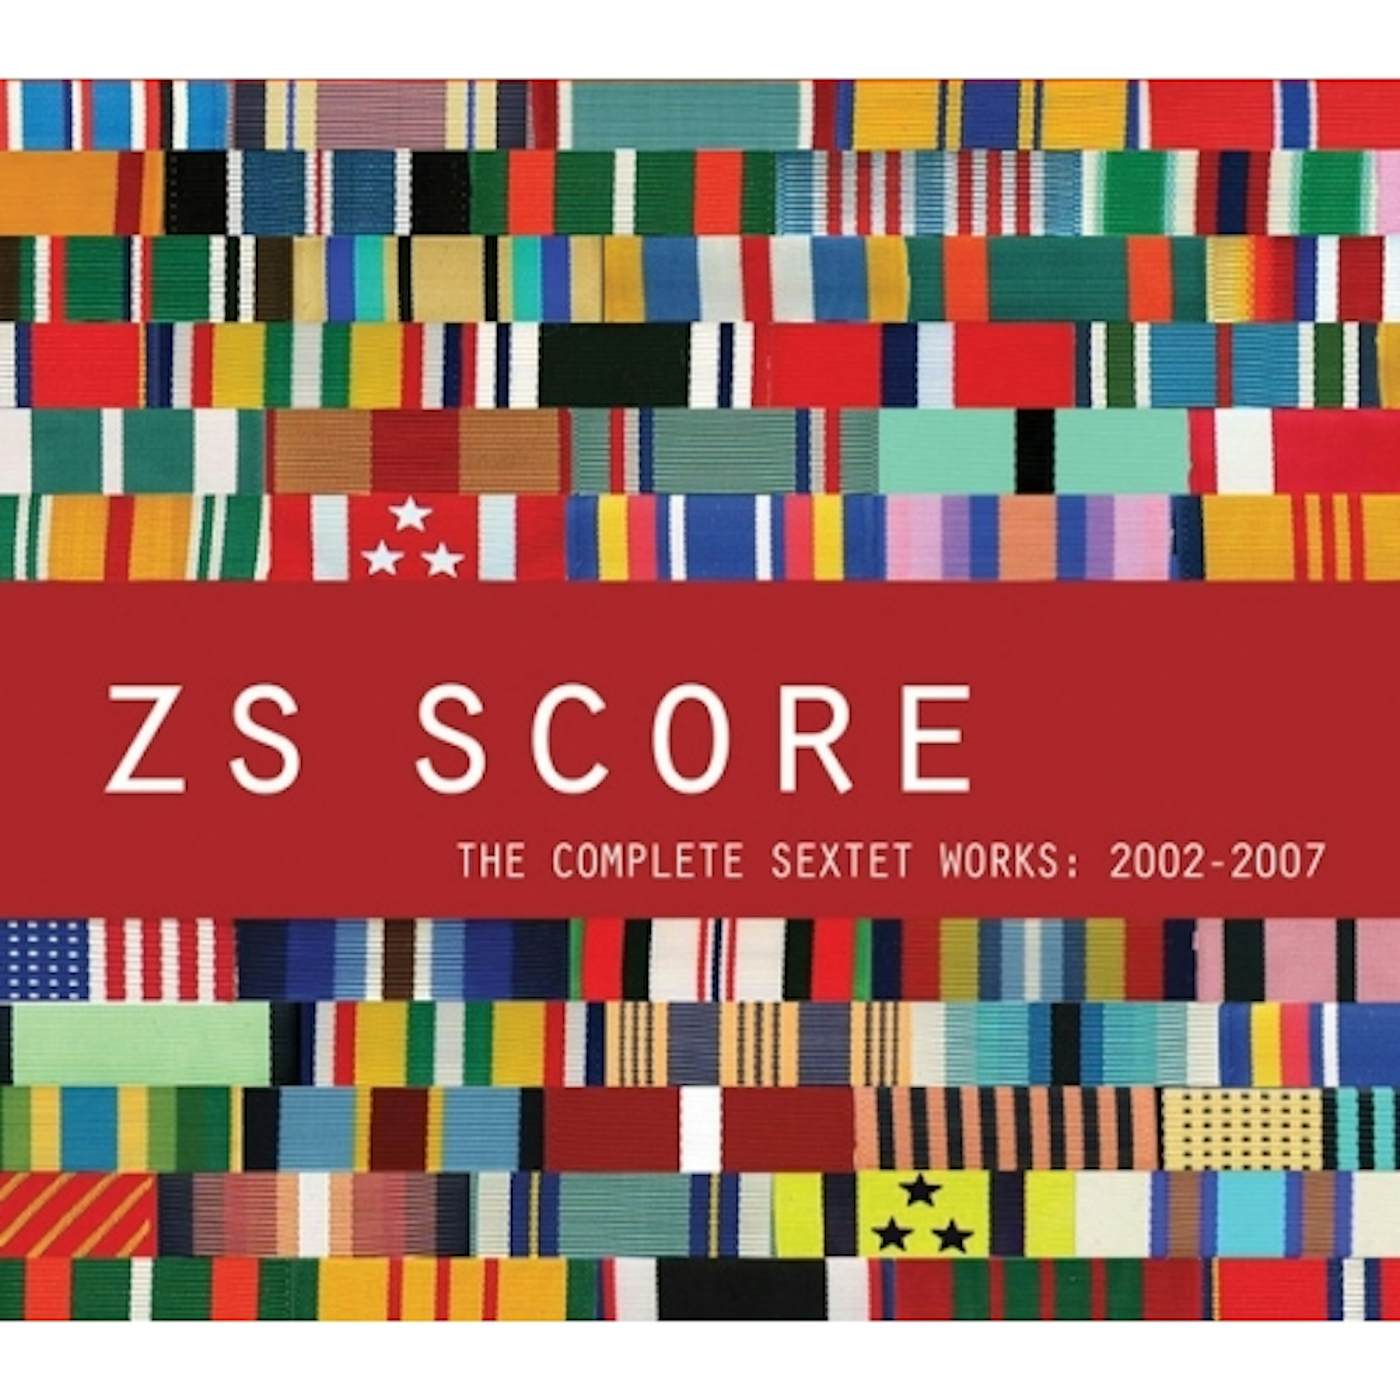 Zs SCORE: THE COMPLETE SEXTET WORKS 2002-2007 CD